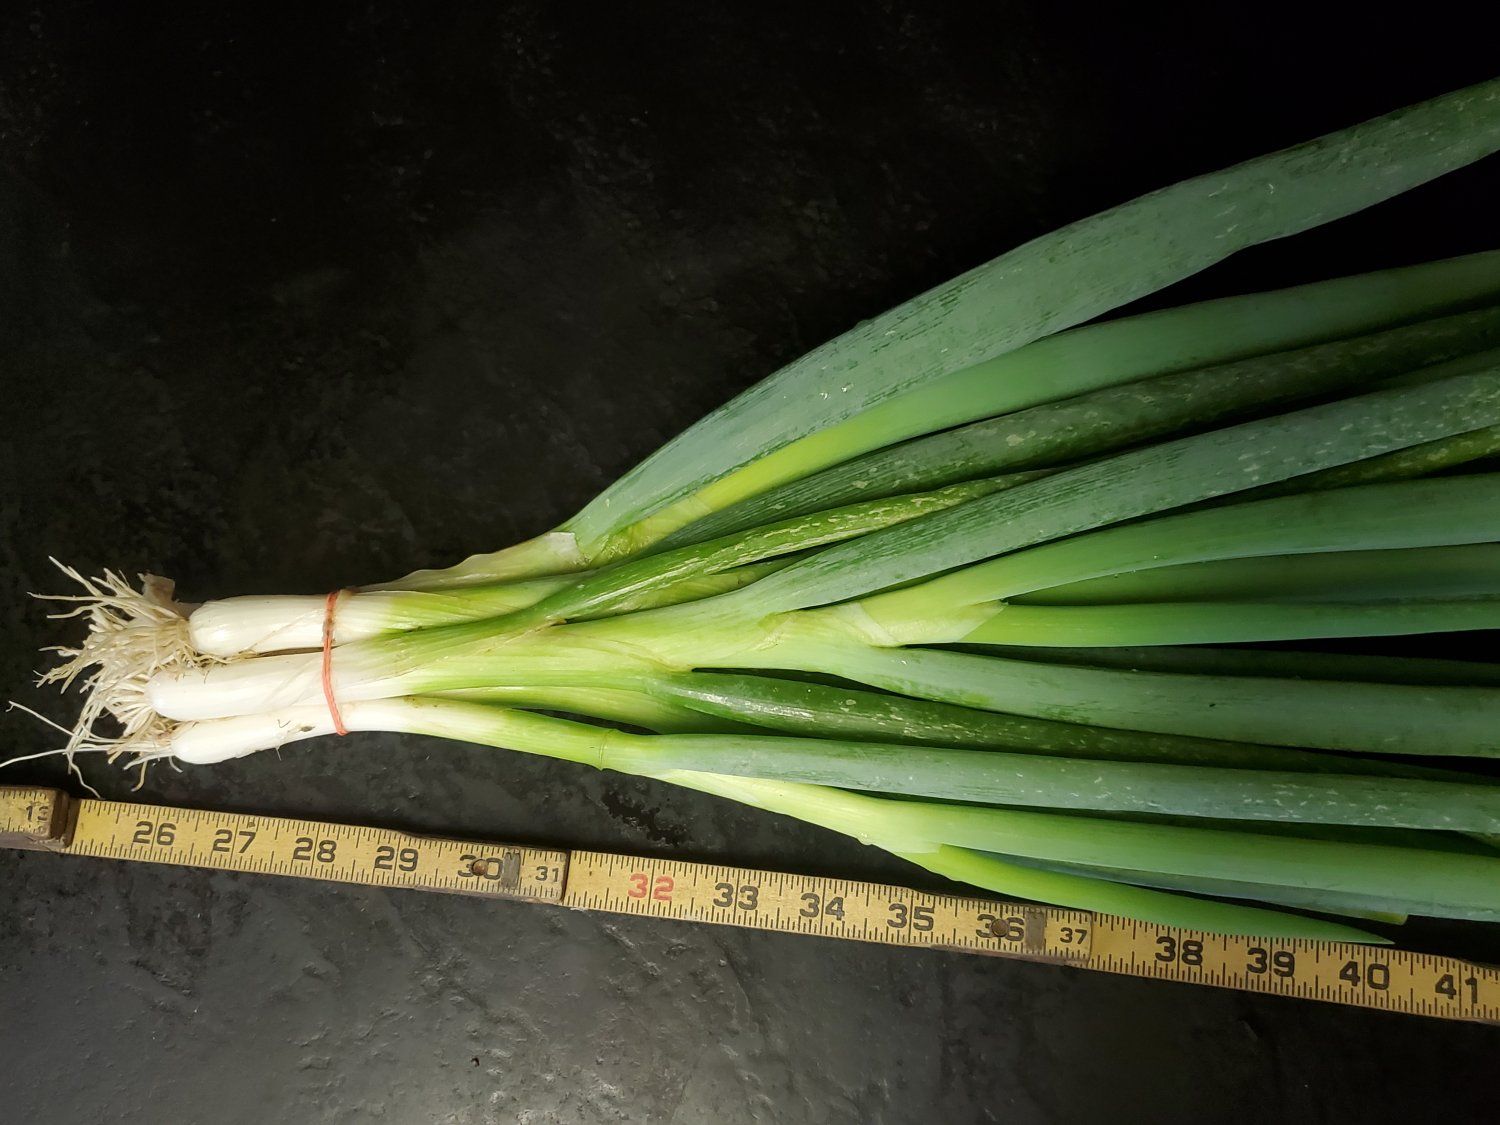 Previous Happening: not your aarage scallion!